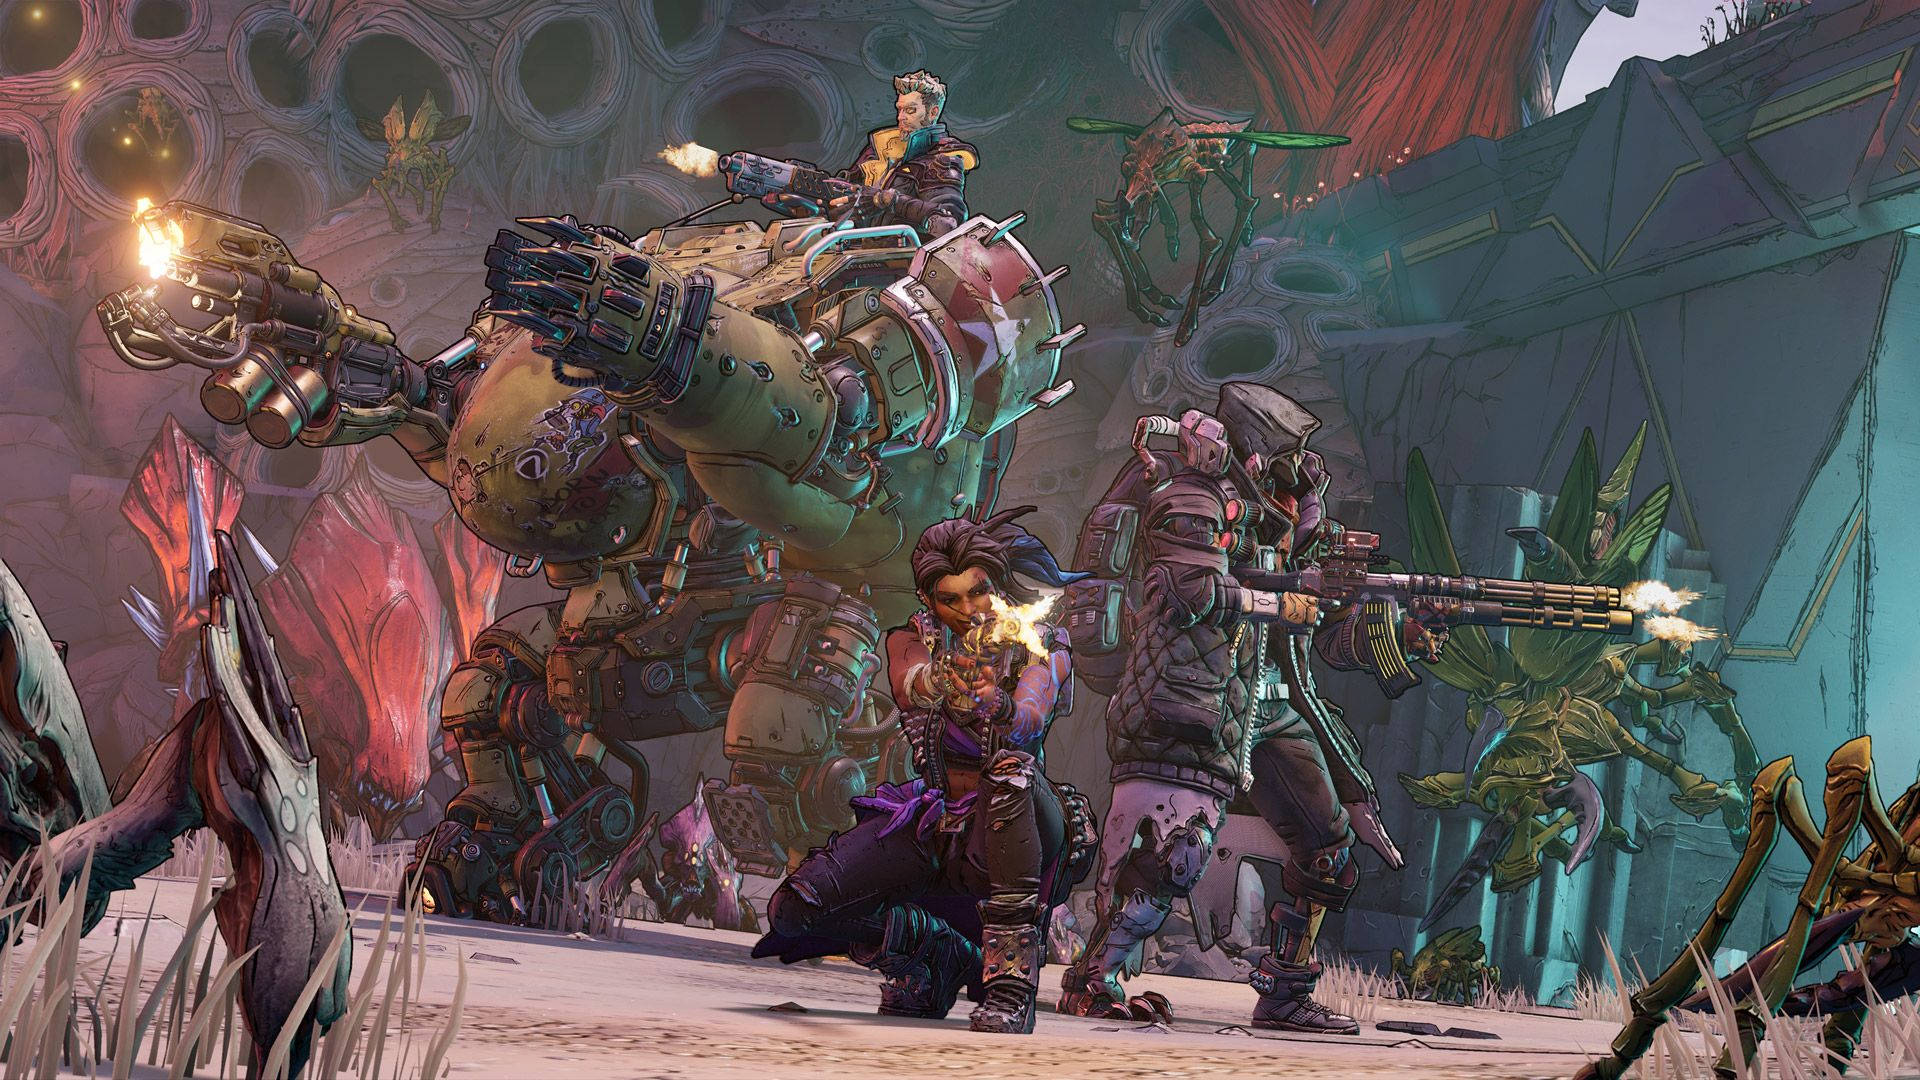 1920X1080 Borderlands 3 Wallpaper and Background